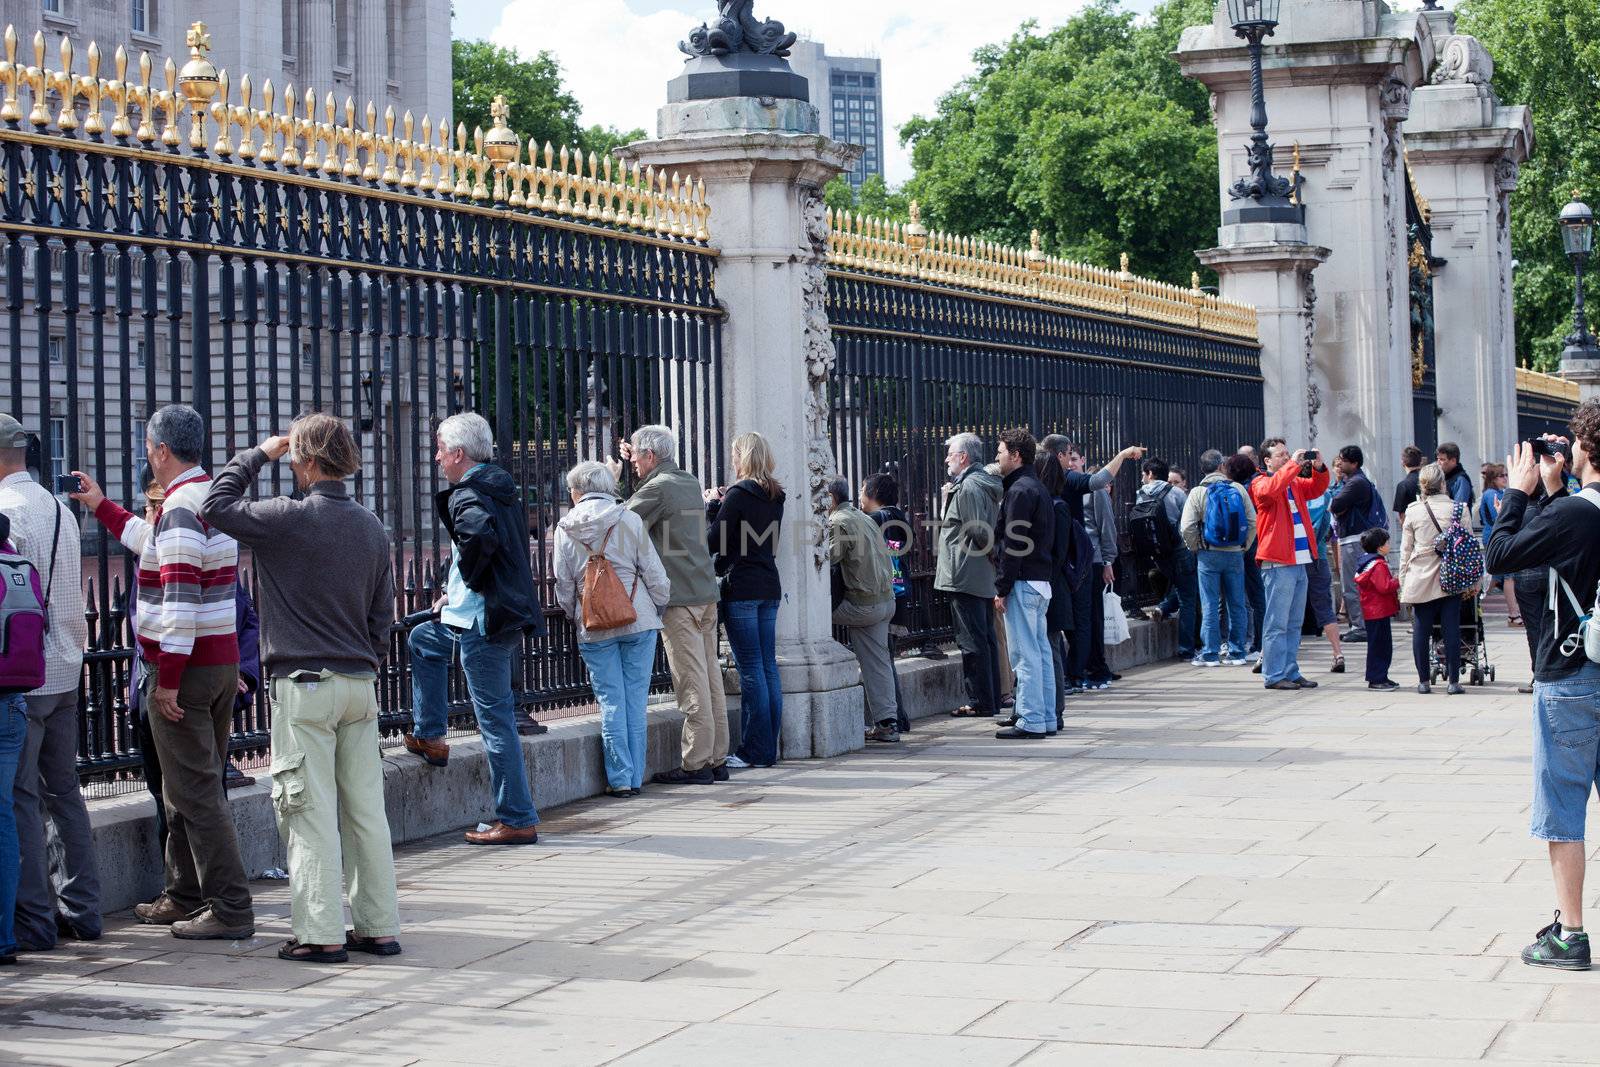 LONDON - JUNE 6: Tourists watch the Royal Guards through fence of the Buckingham Palace on June 6, 2011 in London, UK. Buckingham Palace is the principal residence and office of the British monarch and one of most popular attraction for visitors in London.